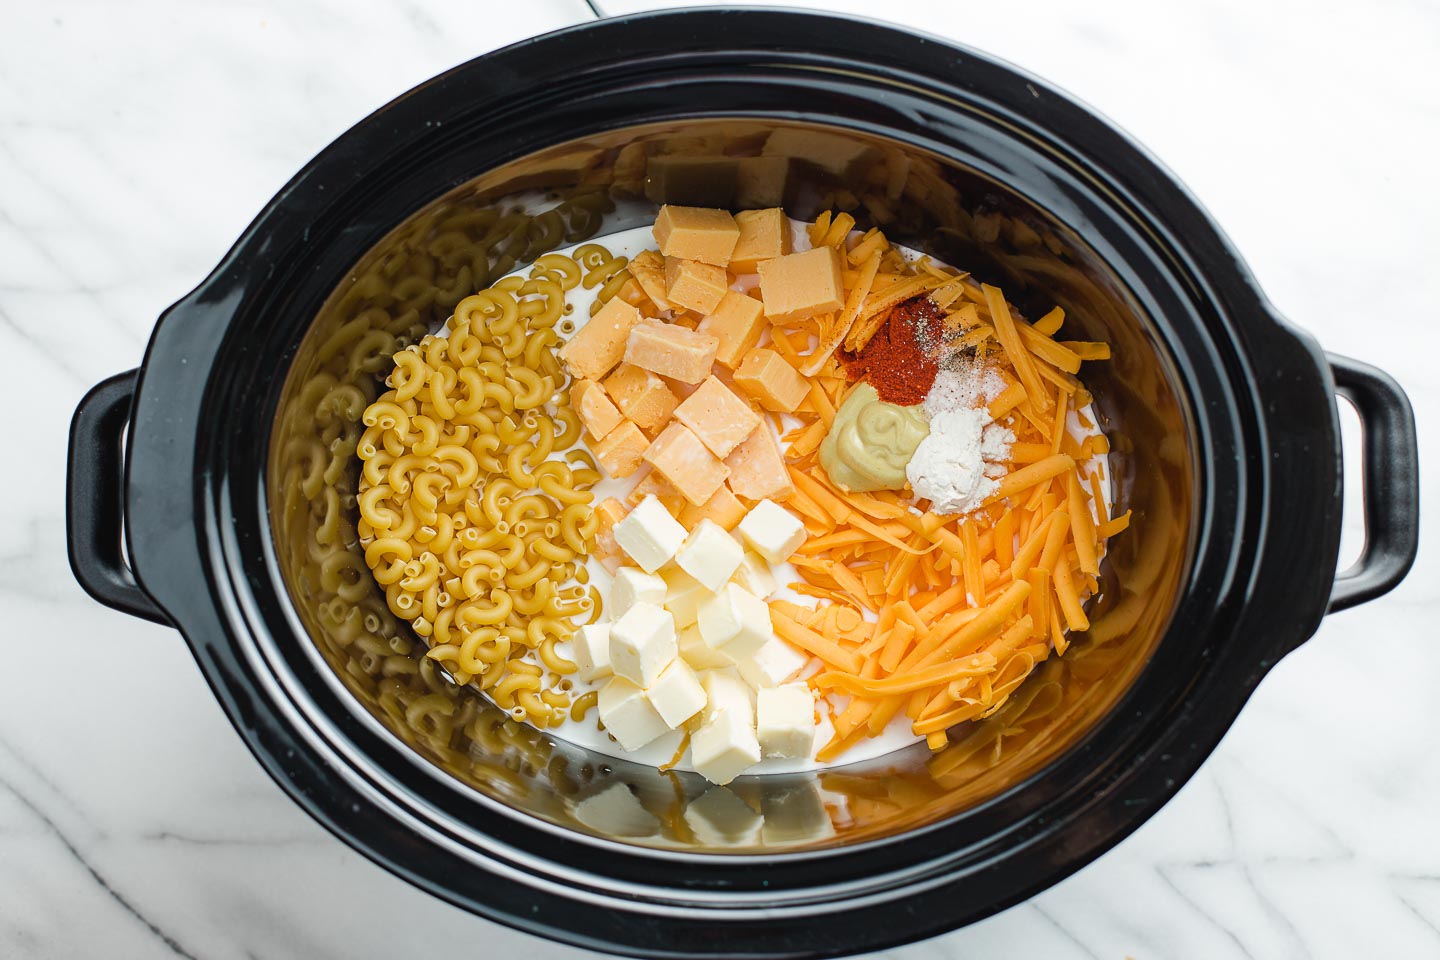 Slow cooker mac and cheese ingredients in a crock-pot liner.